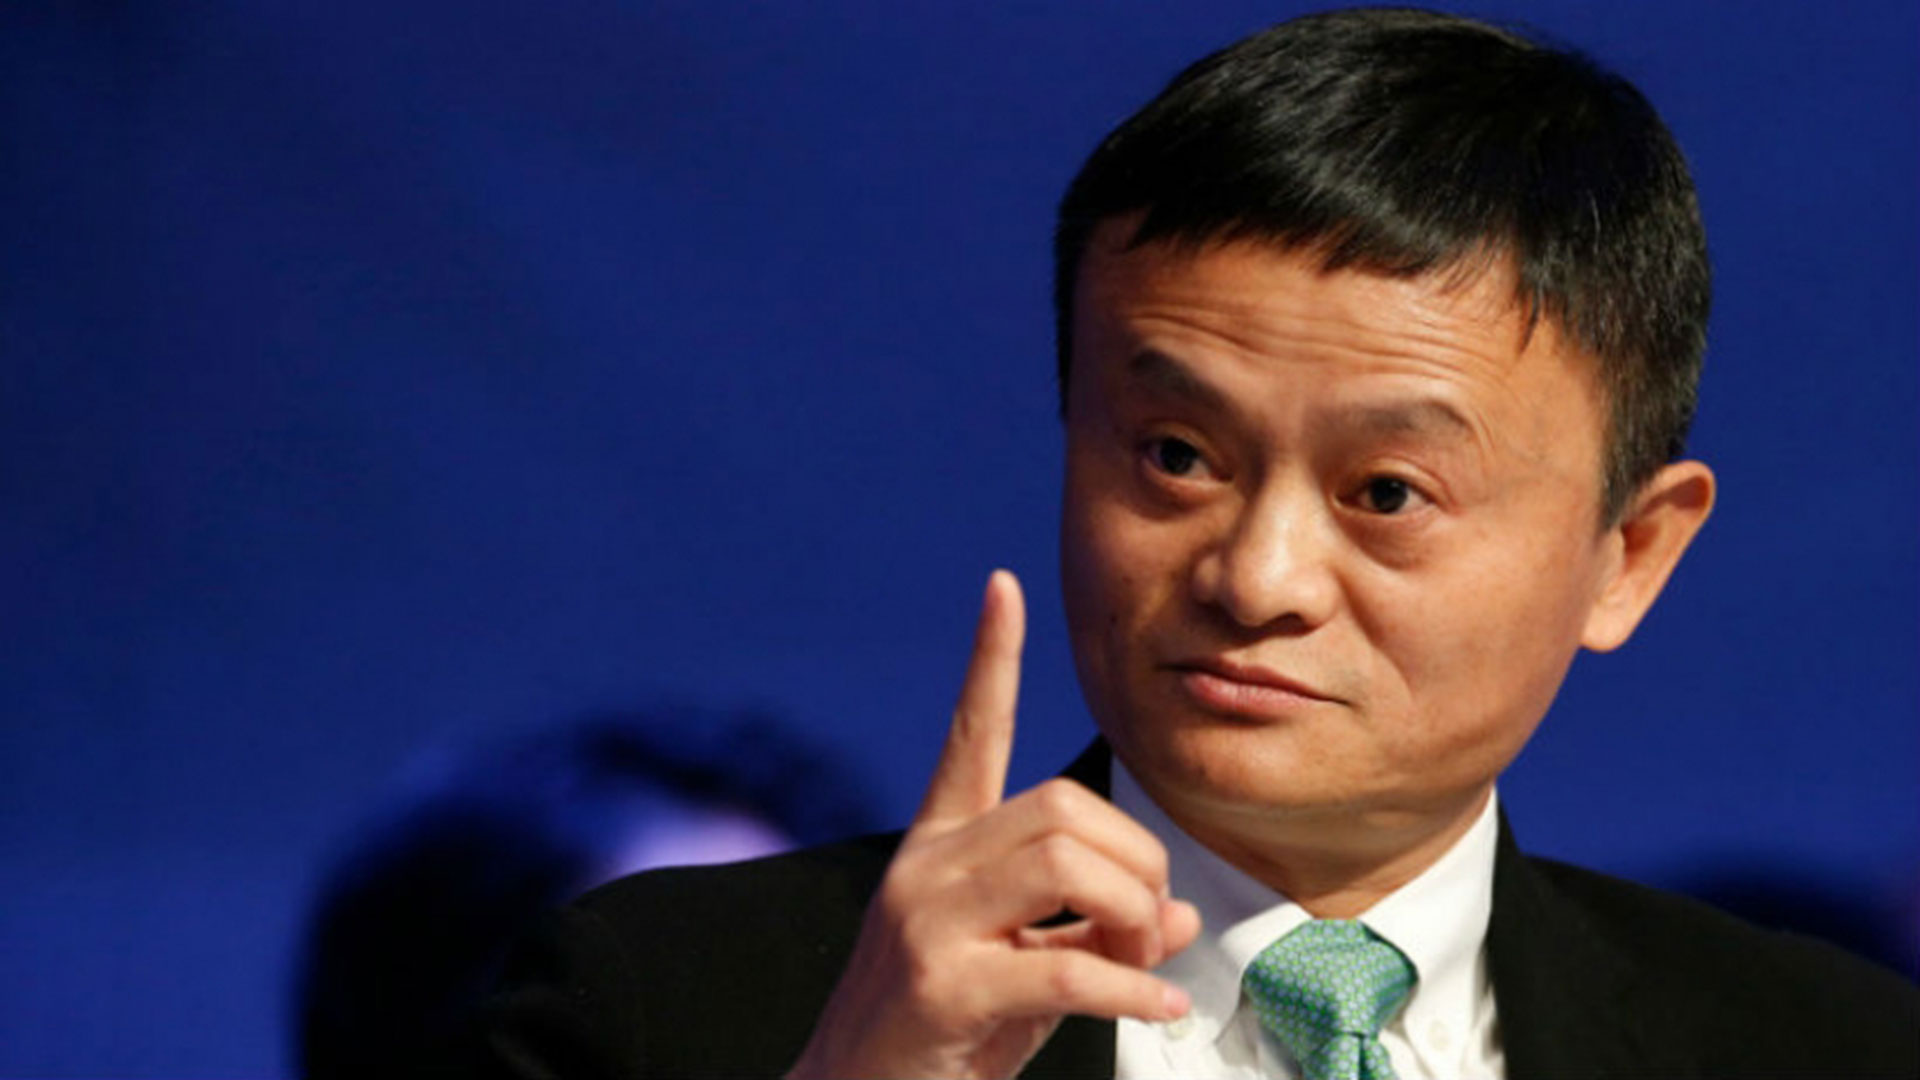 Jack Ma, the founder of Alibaba, is hoping for cryptocurrencies